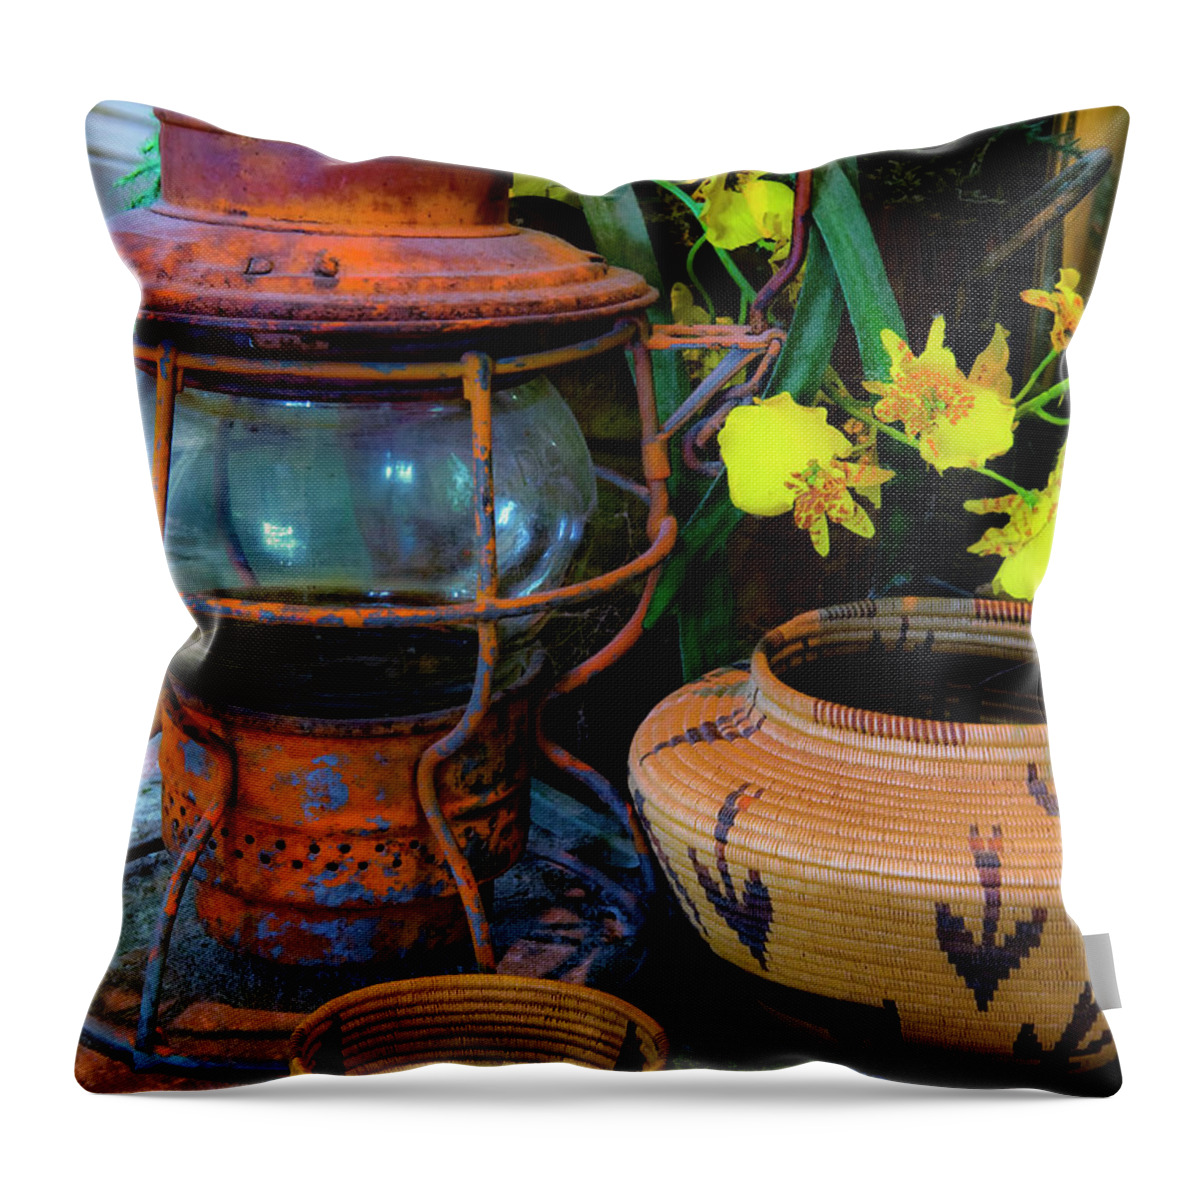 Lantern Throw Pillow featuring the photograph Lantern with Baskets by Stephen Anderson